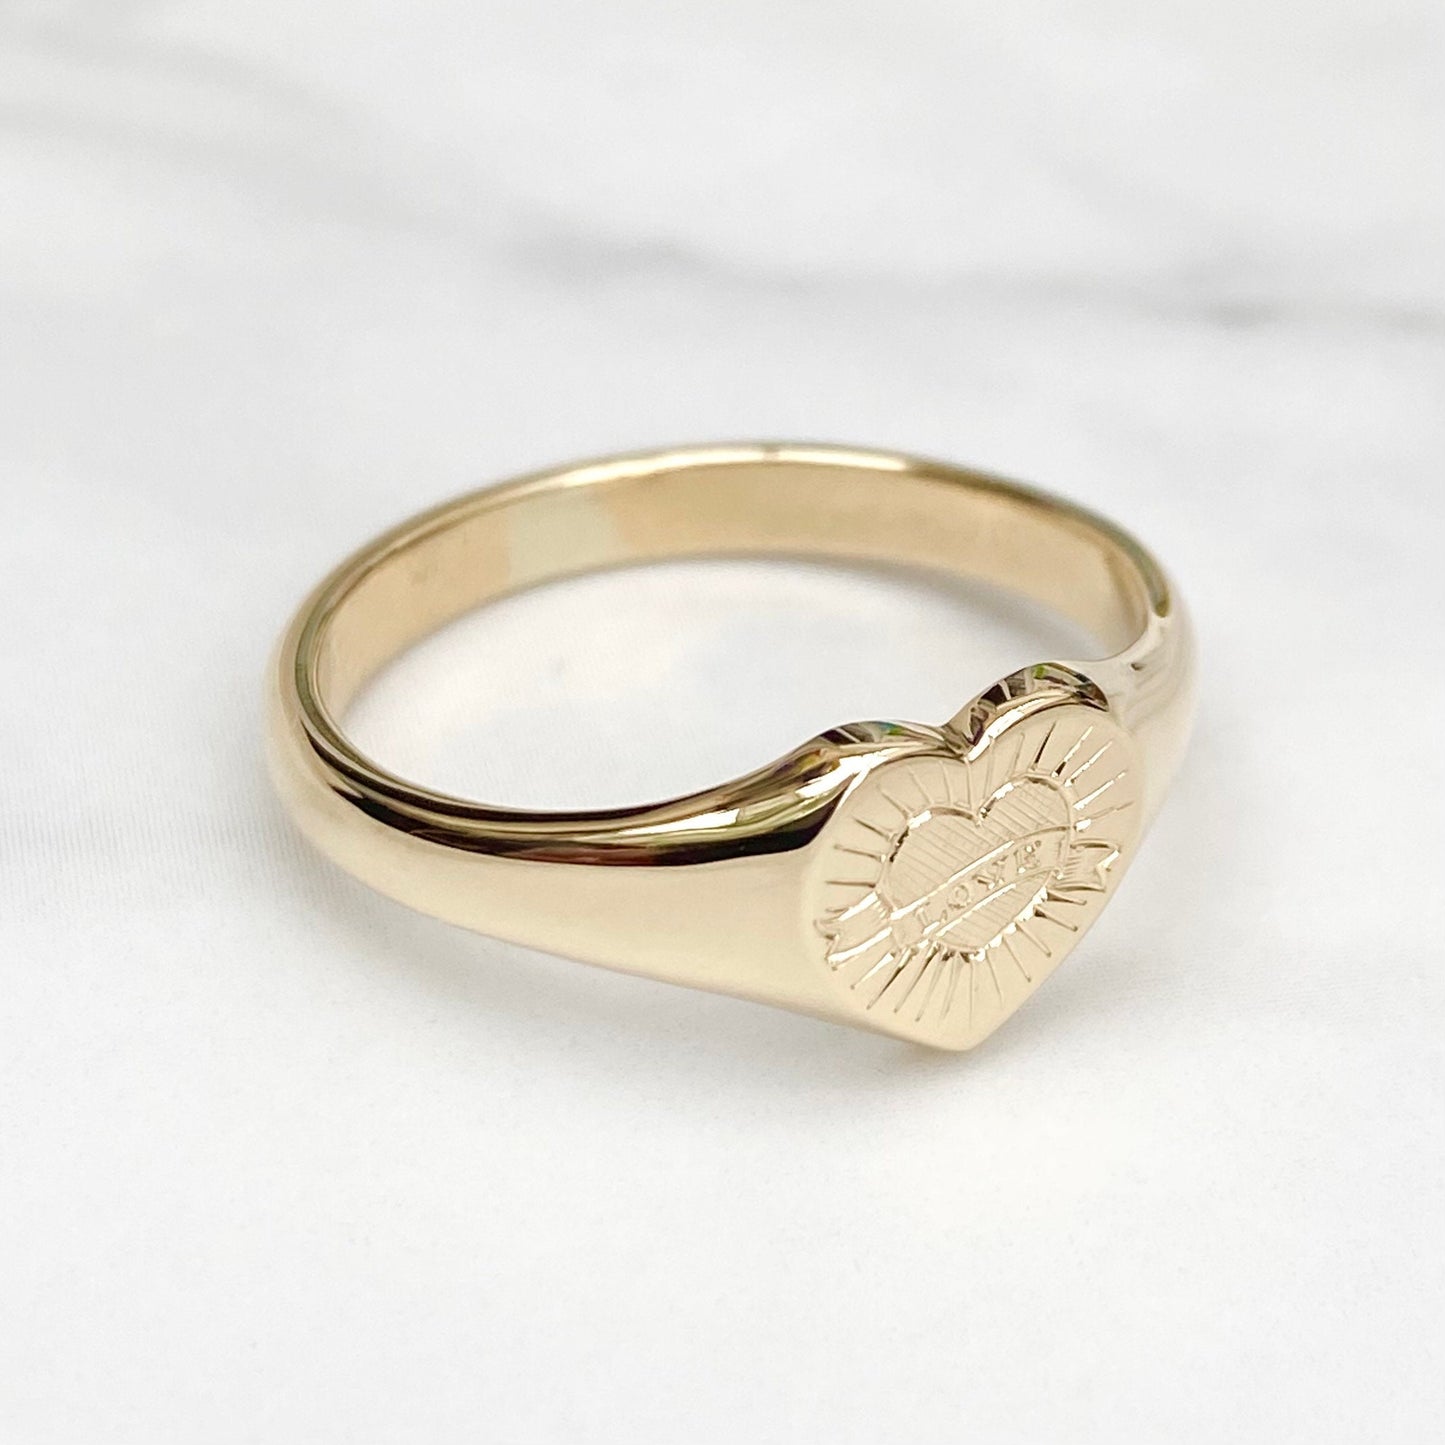 Handmade to order - Ladies 9ct yellow gold engraved love heart signet ring